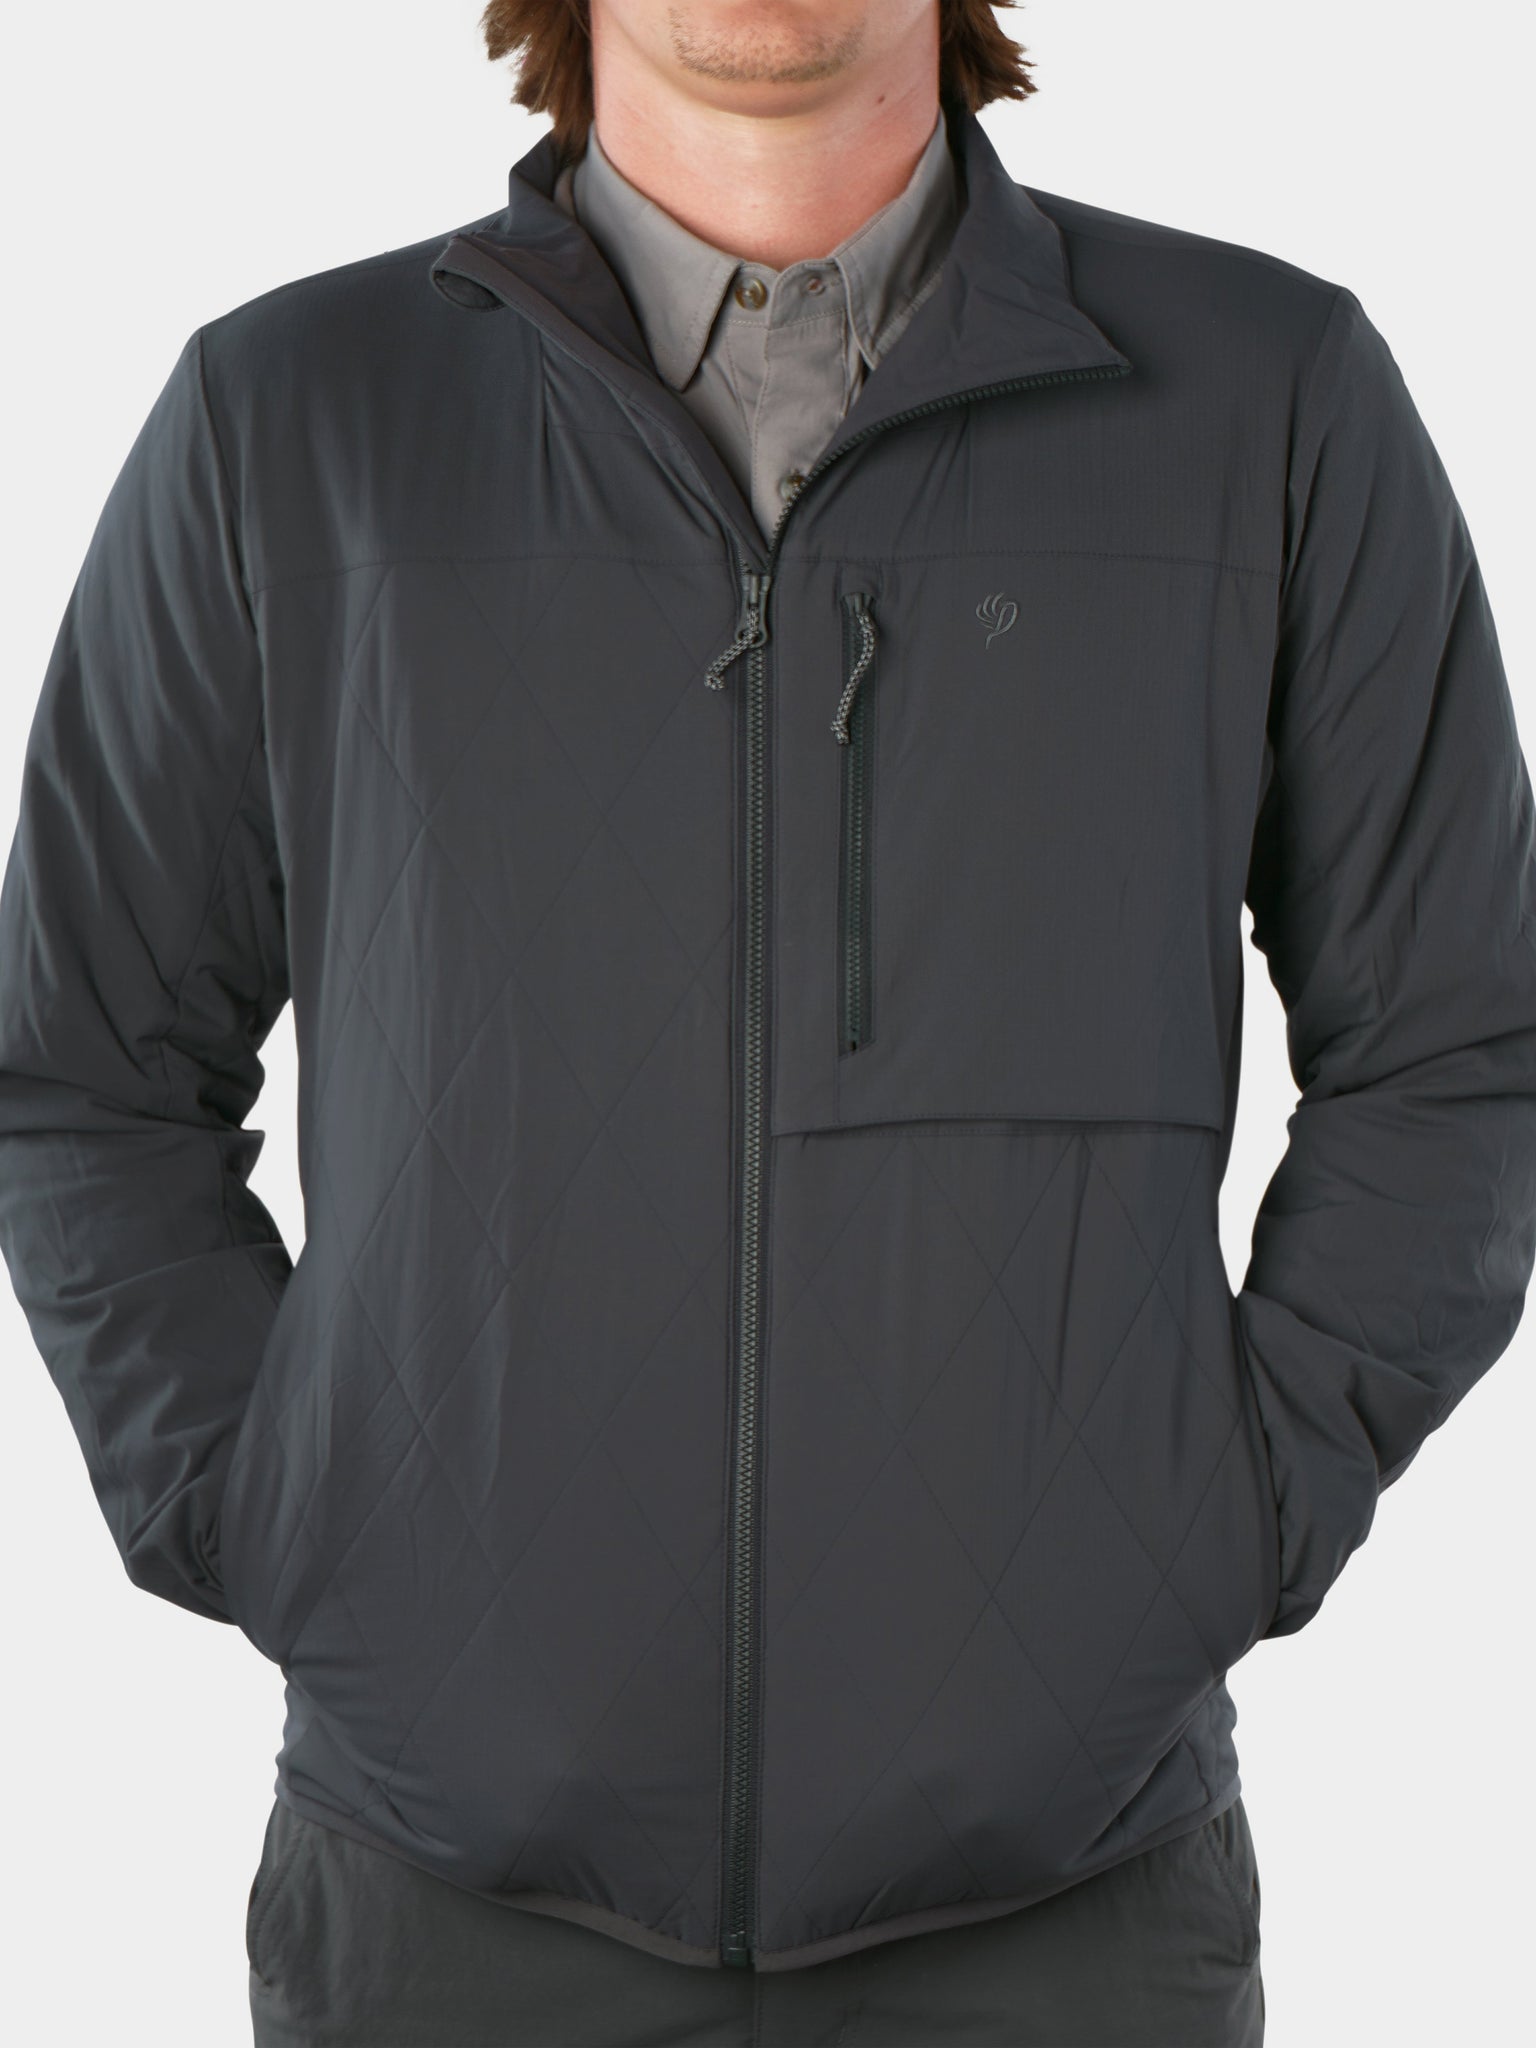 Airflow Insulated Jacket - Charcoal